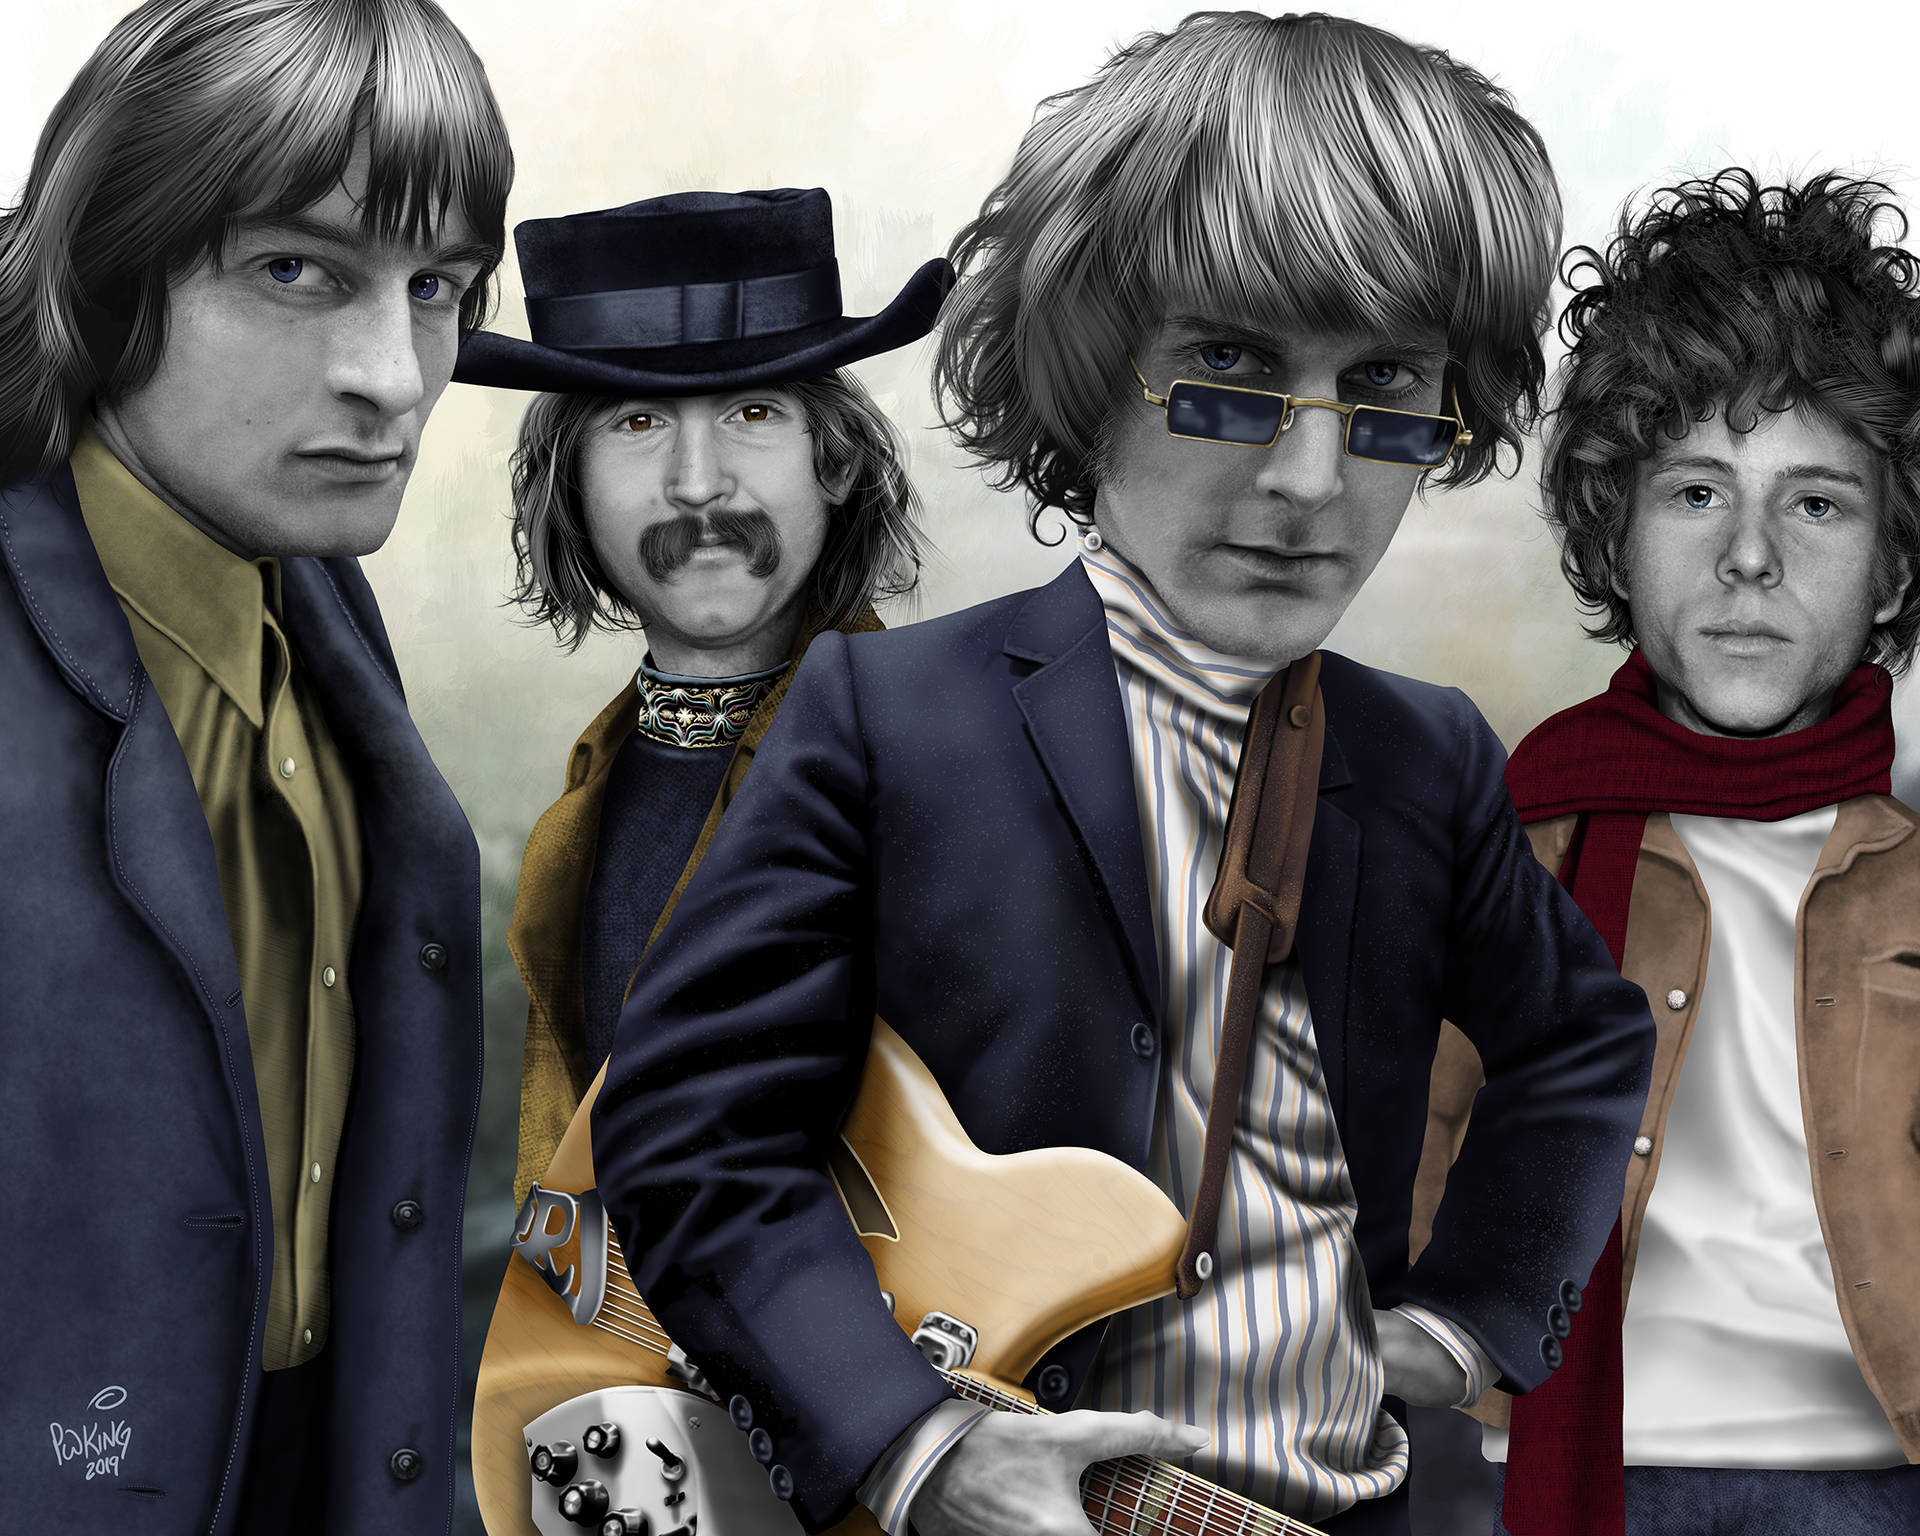 The Byrds Band Caricature Art Wallpaper